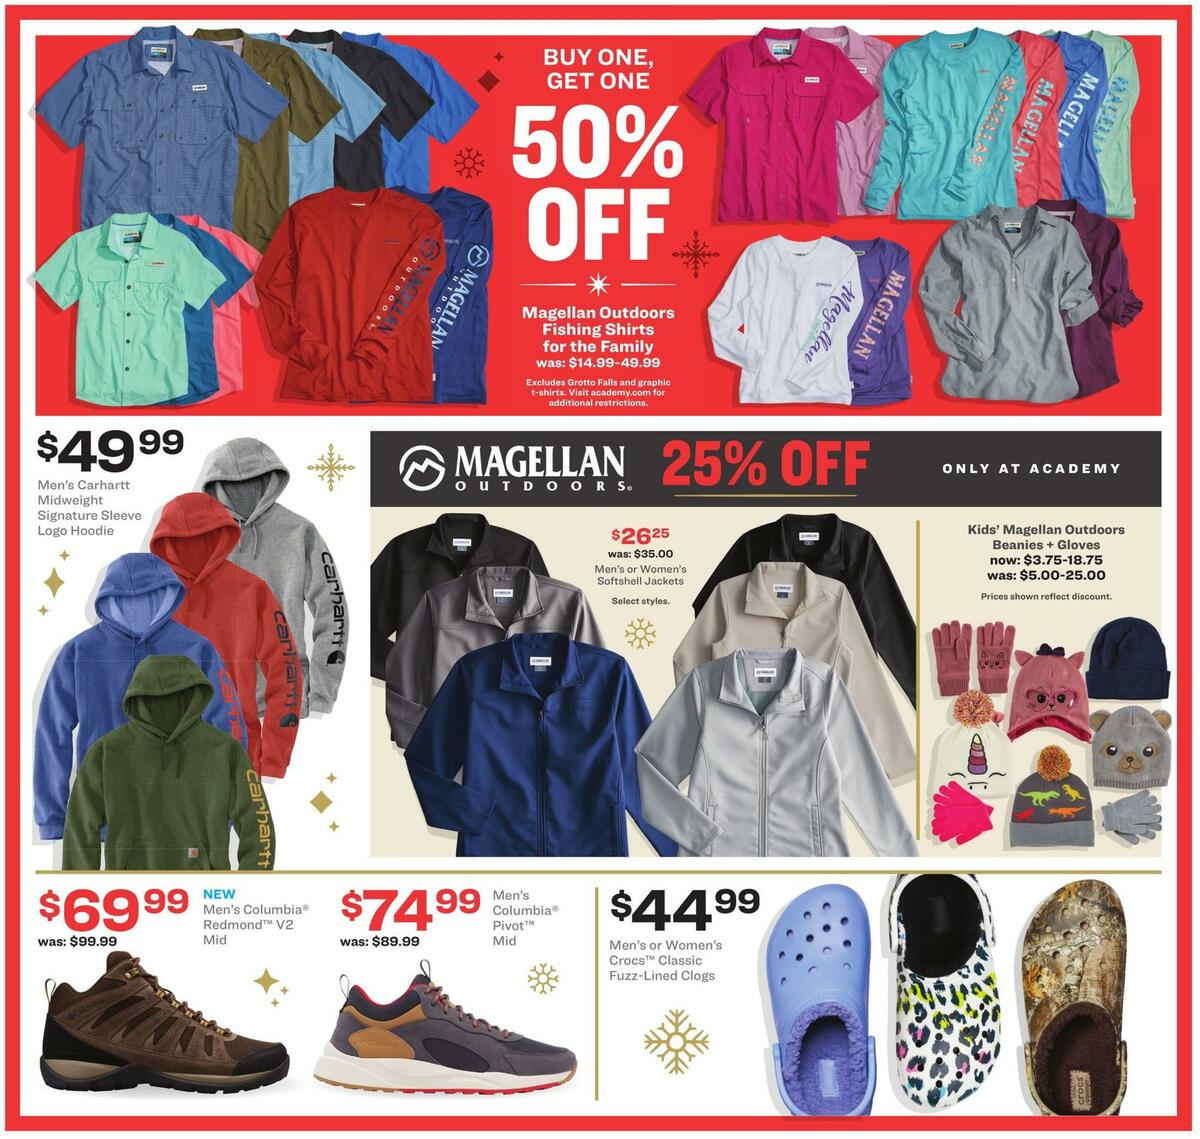 Academy Sports + Outdoors 4 Day Only Ad Weekly Ad from December 17